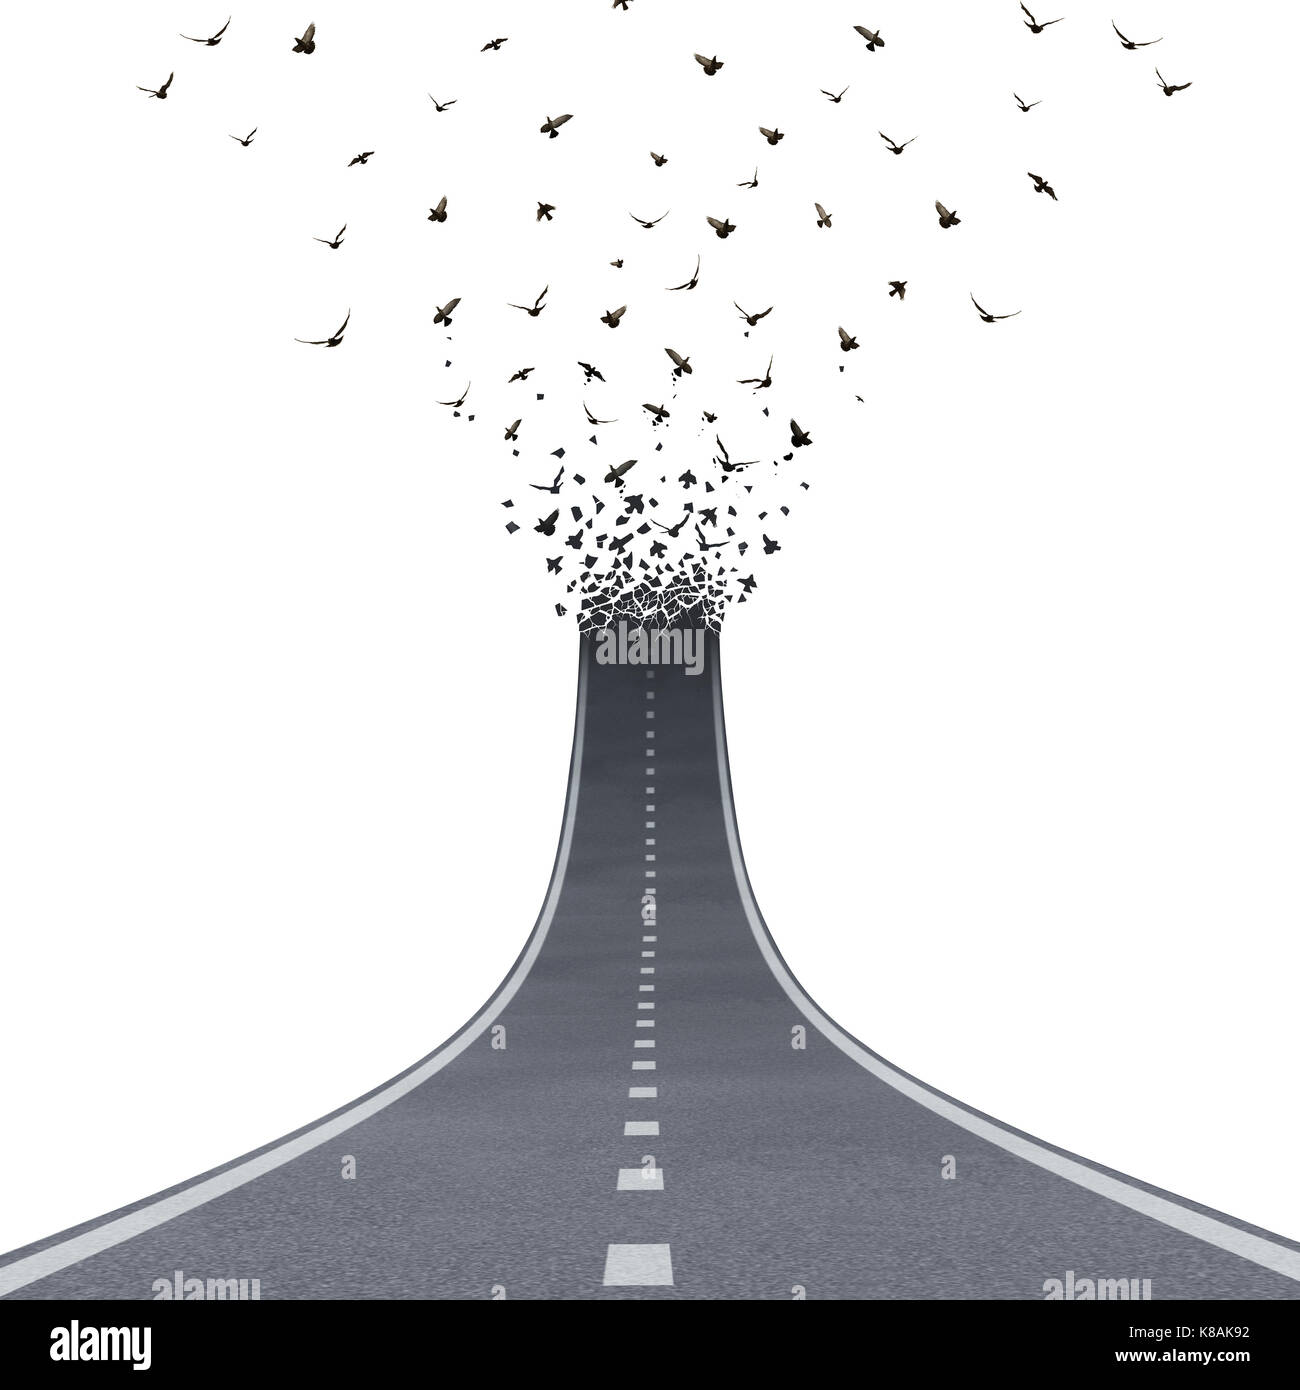 Freedom Road concept as a driving pathway liberty or highway going up and transforming into flying birds as a business metaphor for success. Stock Photo